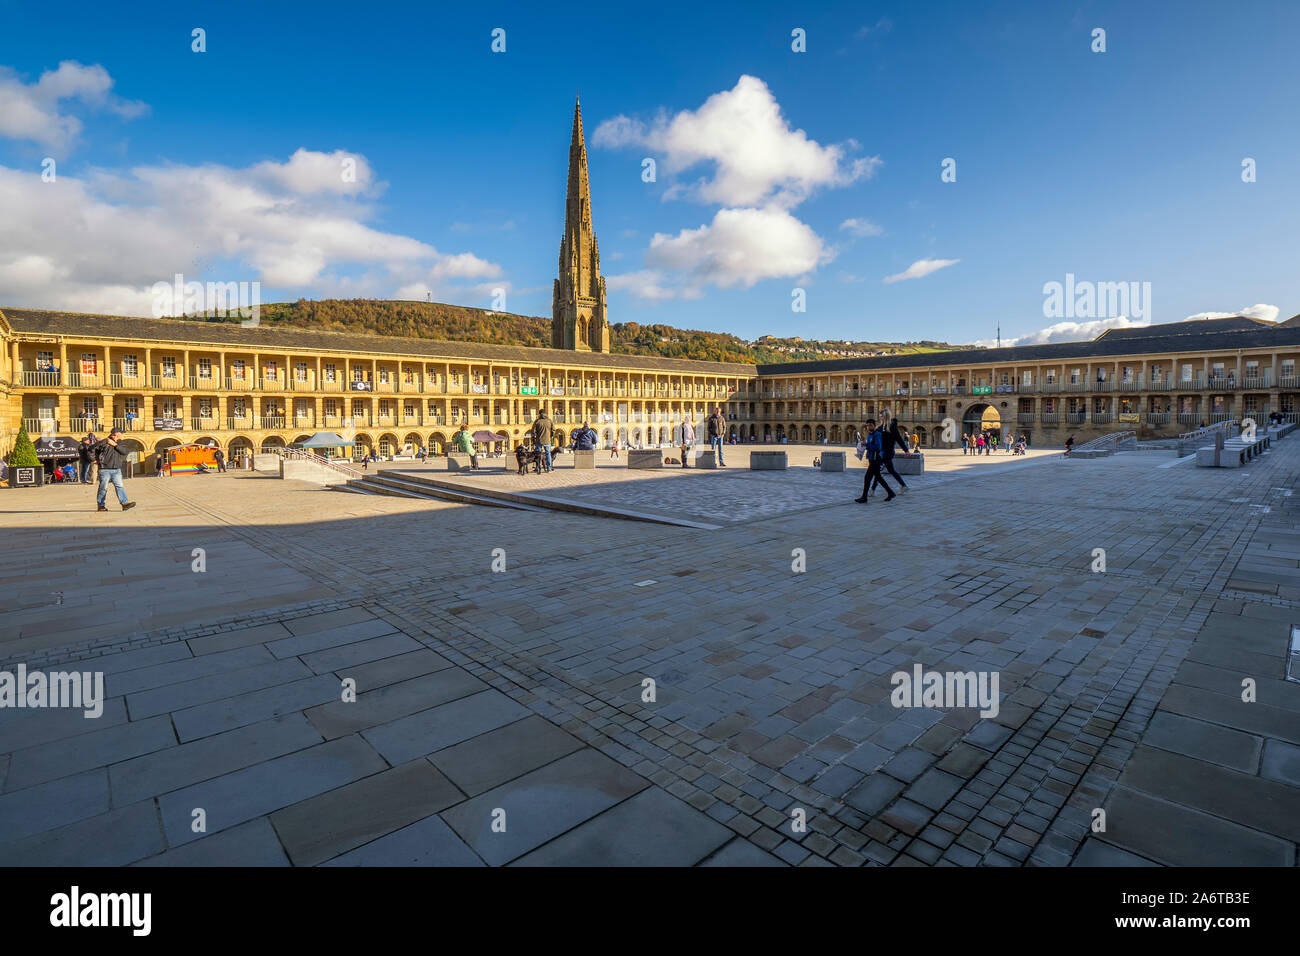 27.10.2019 Halifax, West Yorkshire, UK, The Piece Hall is a Grade I listed building in Halifax, West Yorkshire, England. It was built as a cloth hall Stock Photo